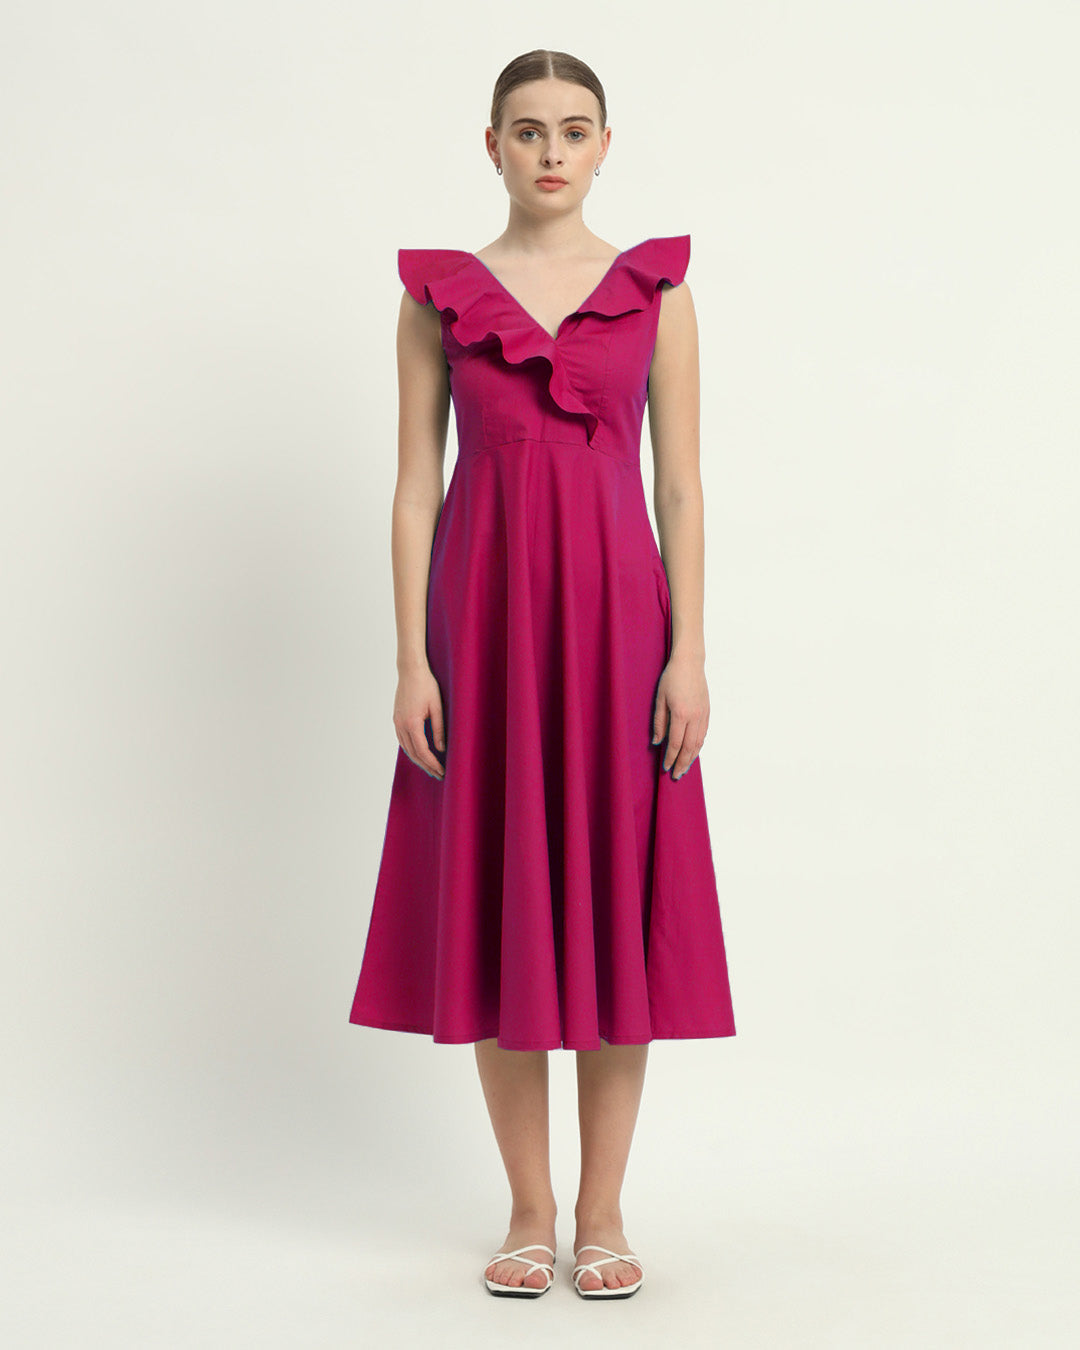 The Berry Albany Cotton Dress